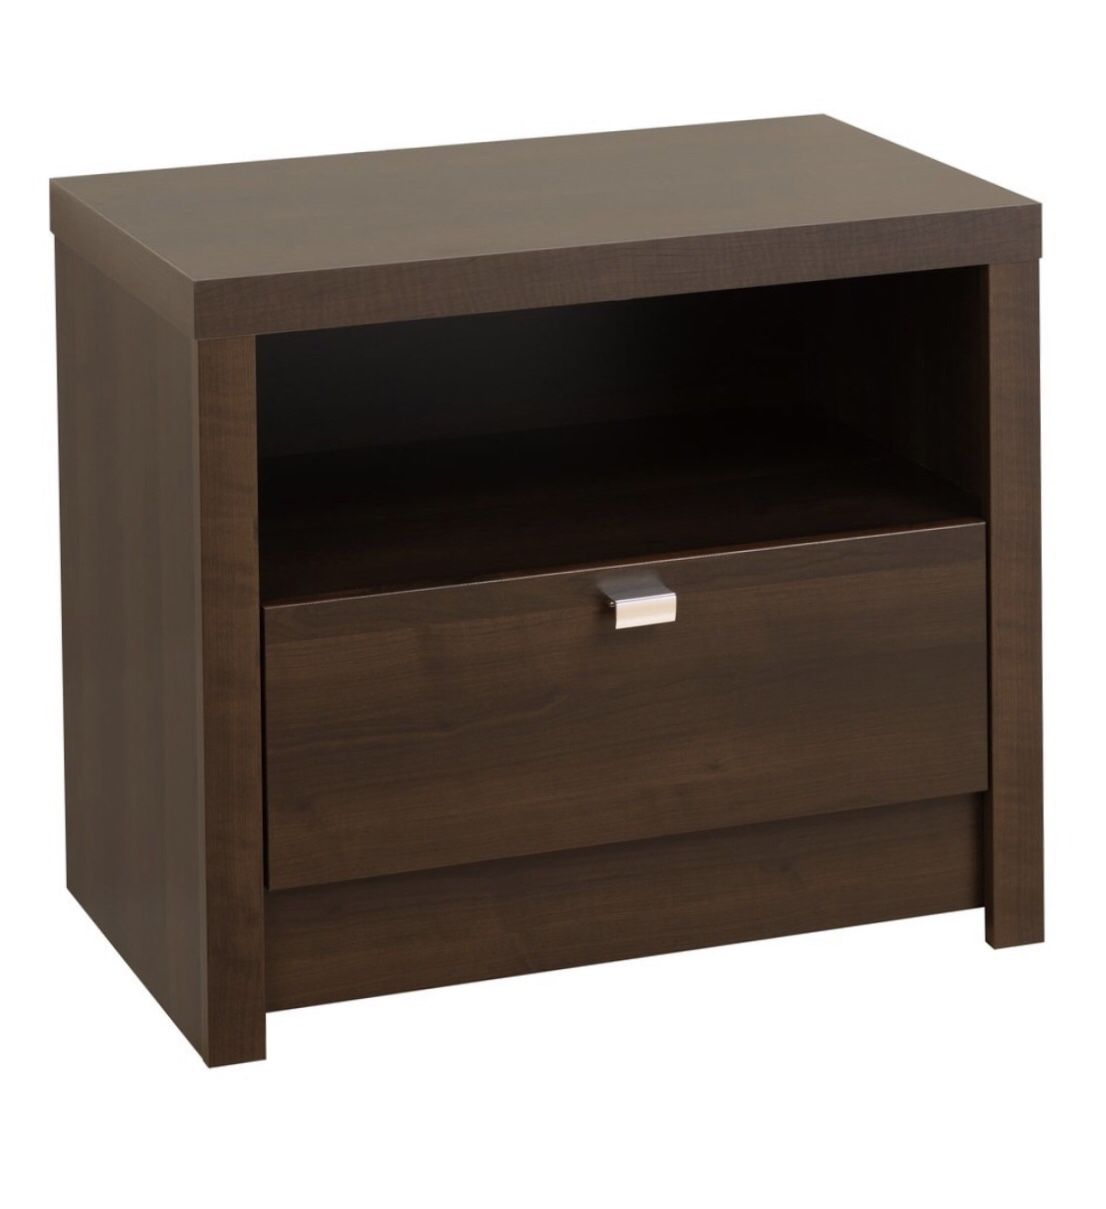 2 NIGHTSTANDS for only $120